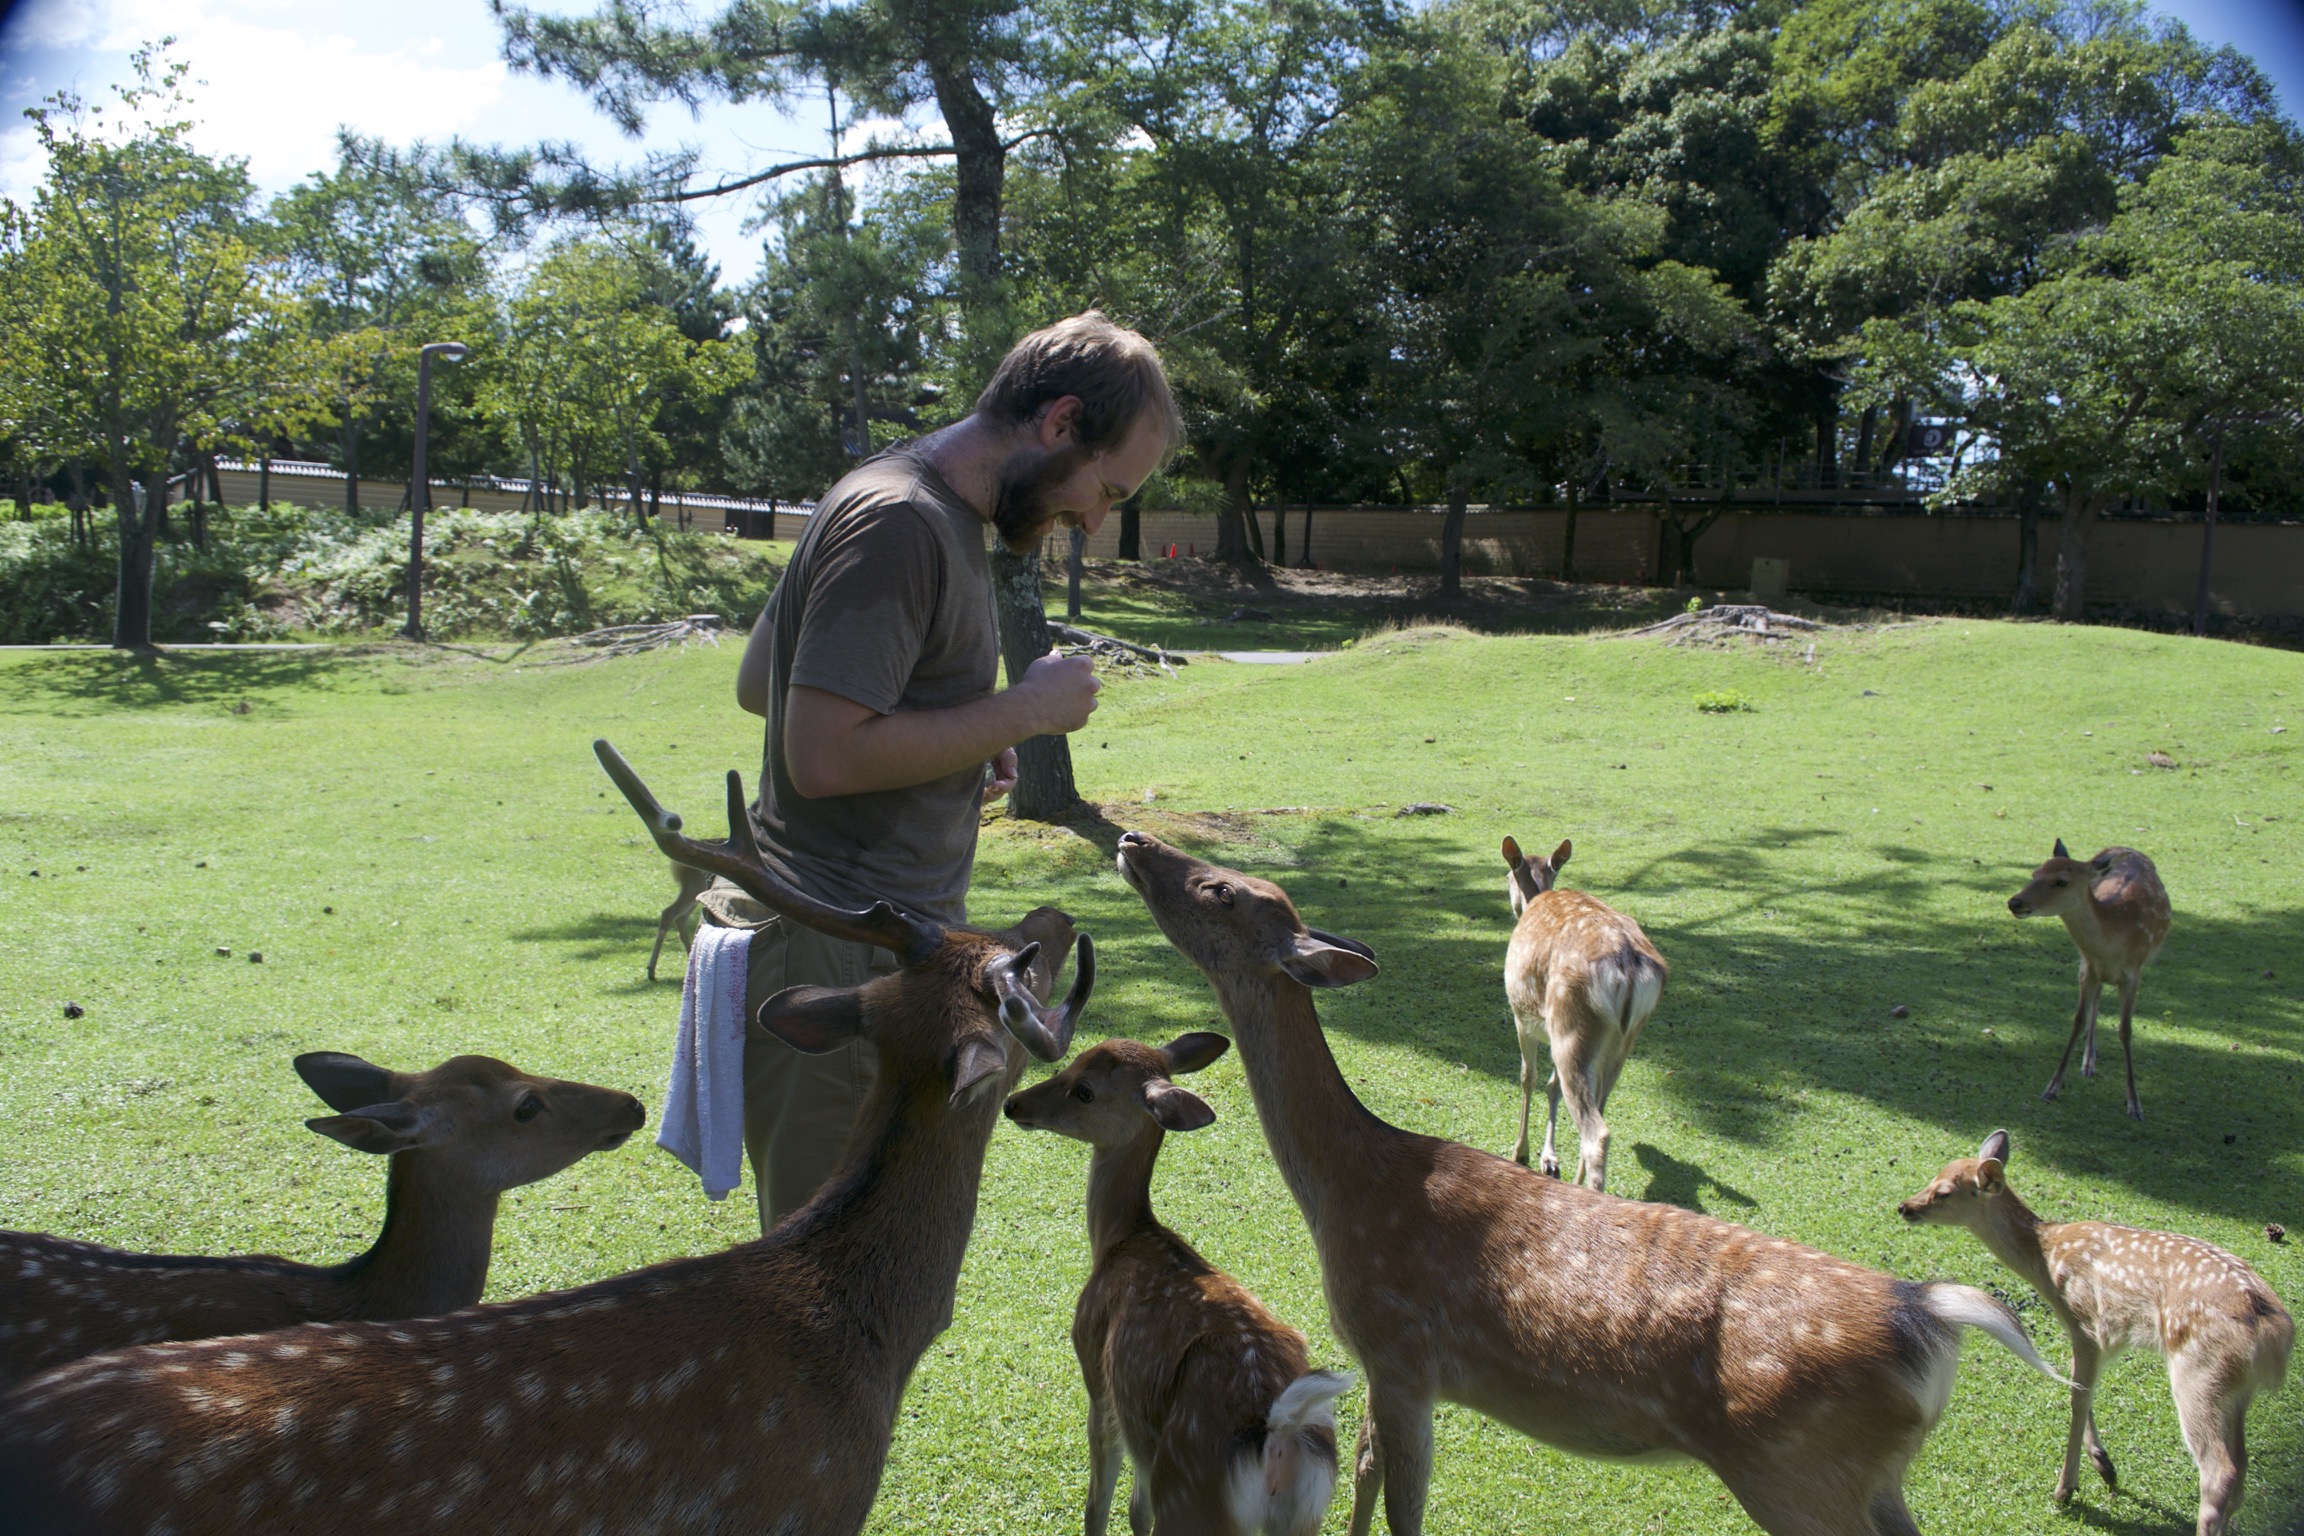 A tourist is surrounded by a buck, does, and fawns.